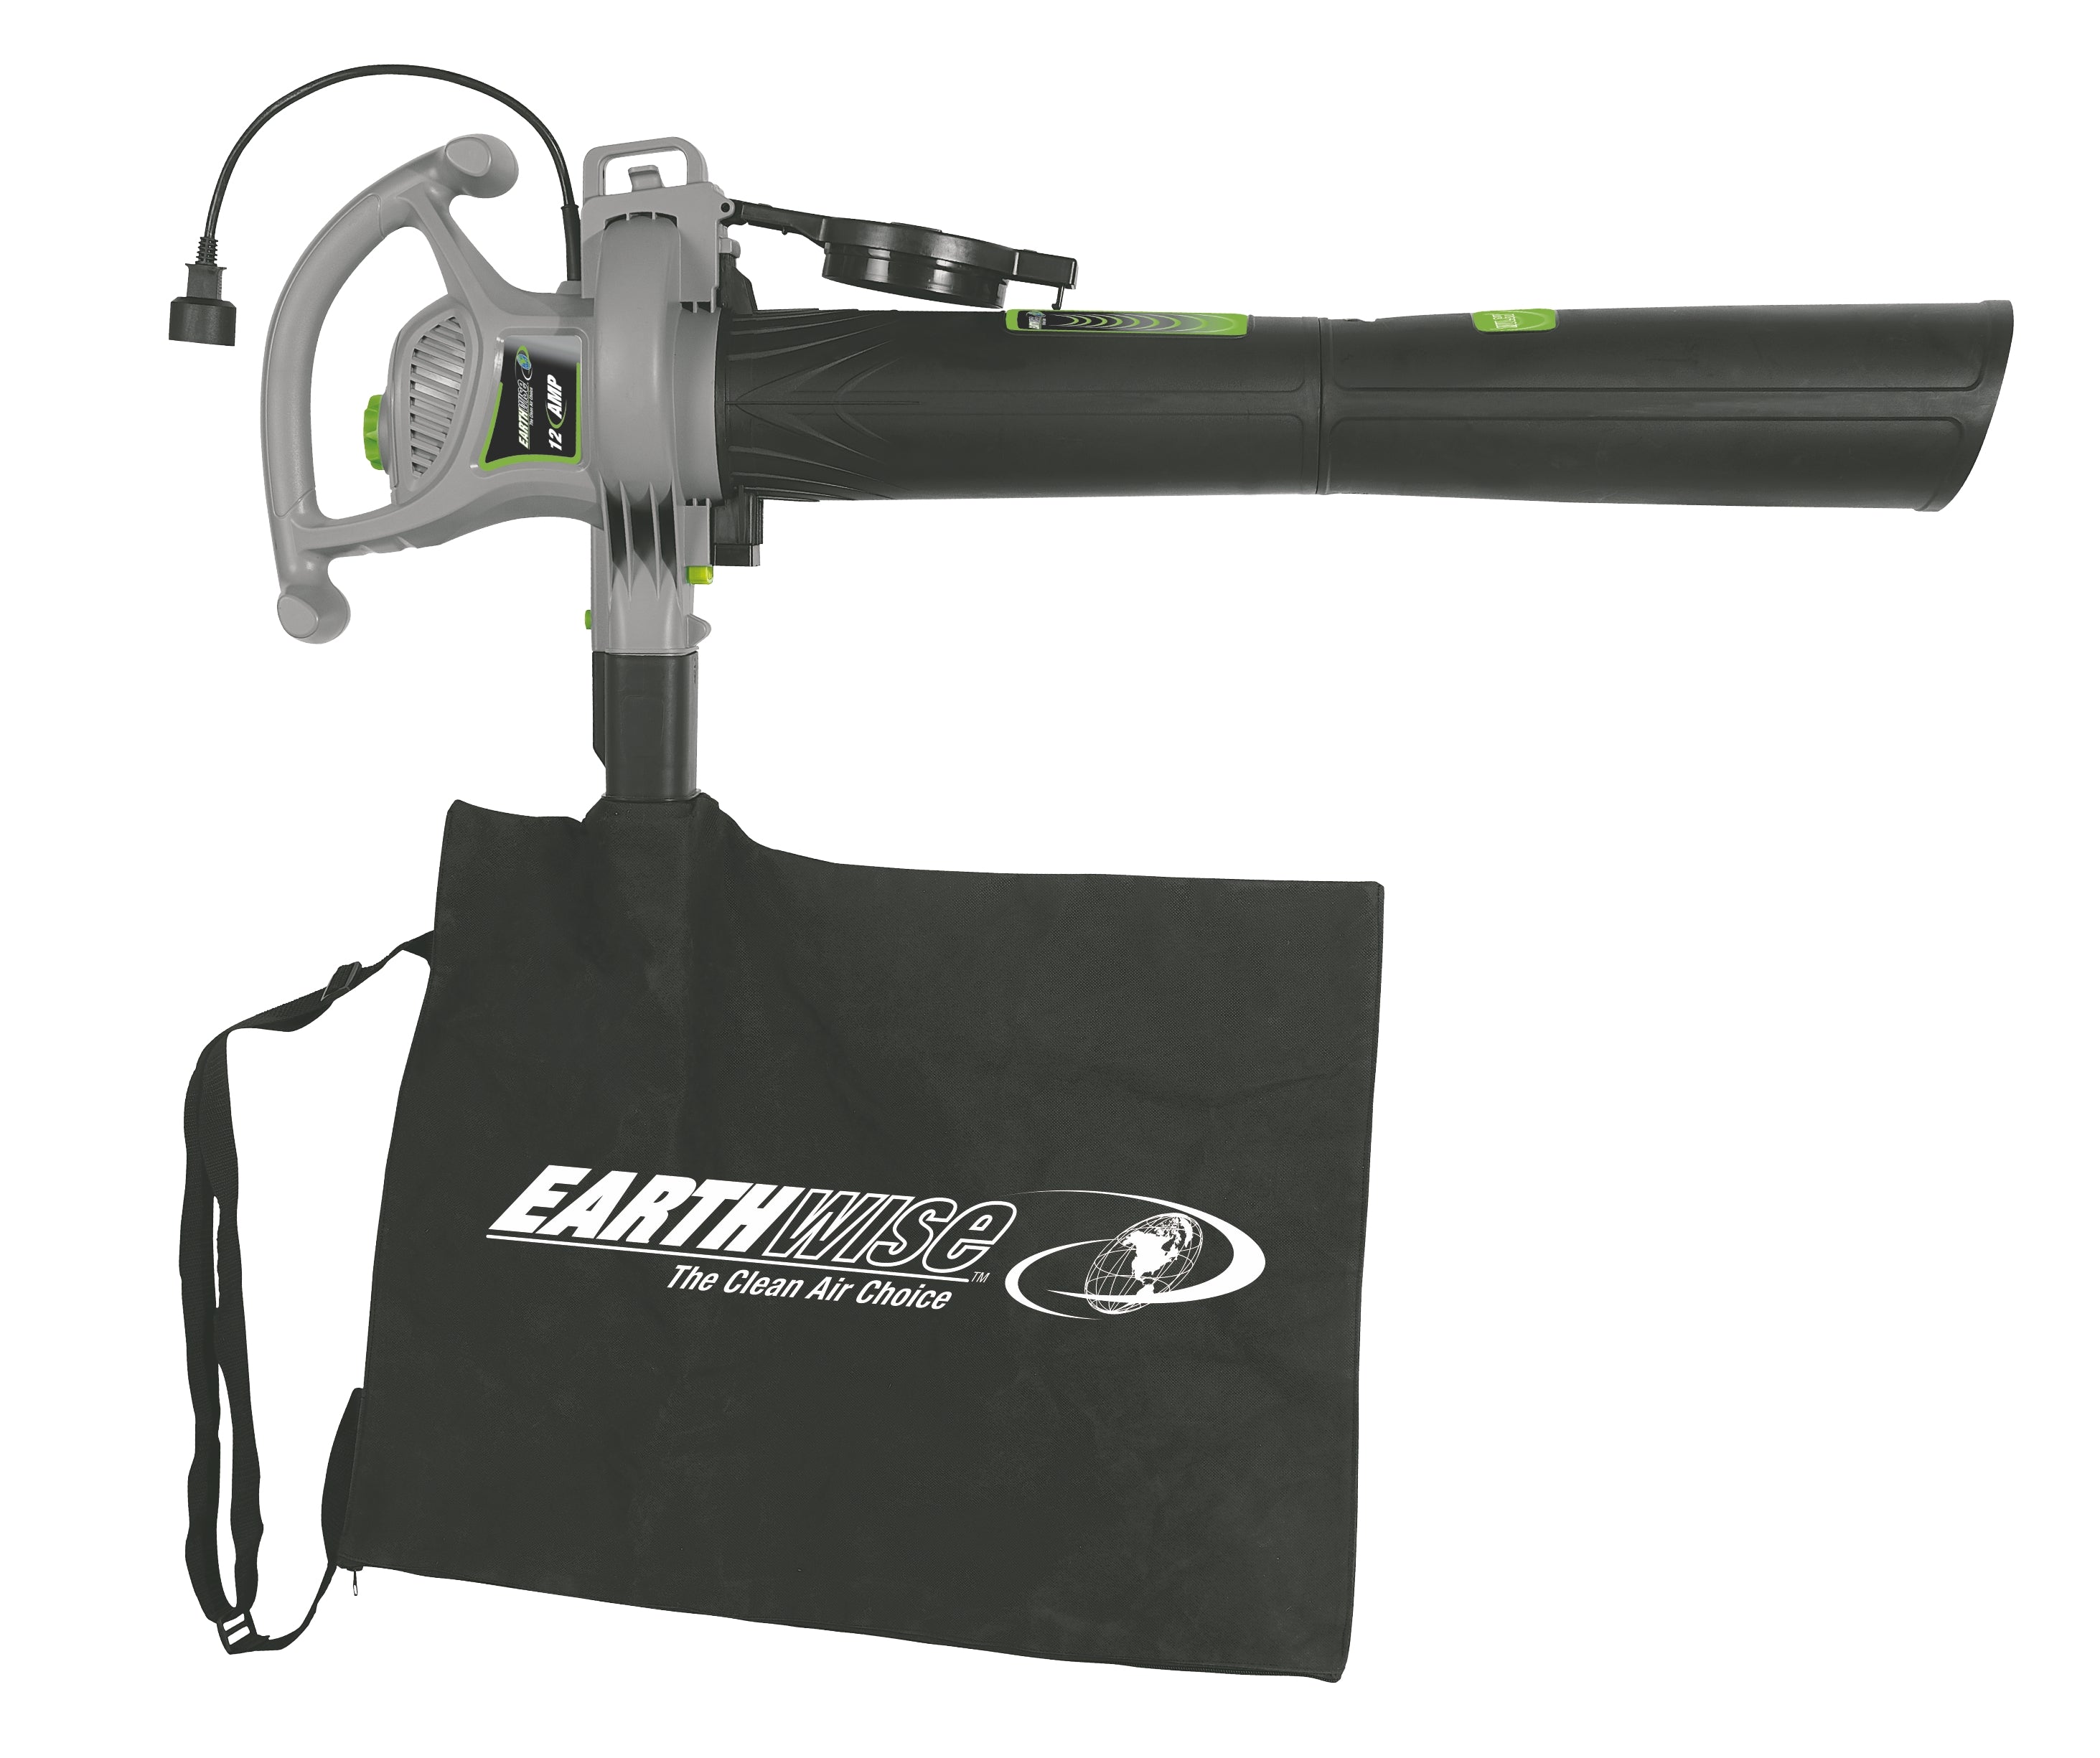 Earthwise Power Tools by ALM 12-Amp 120V Corded Blower Vacuum